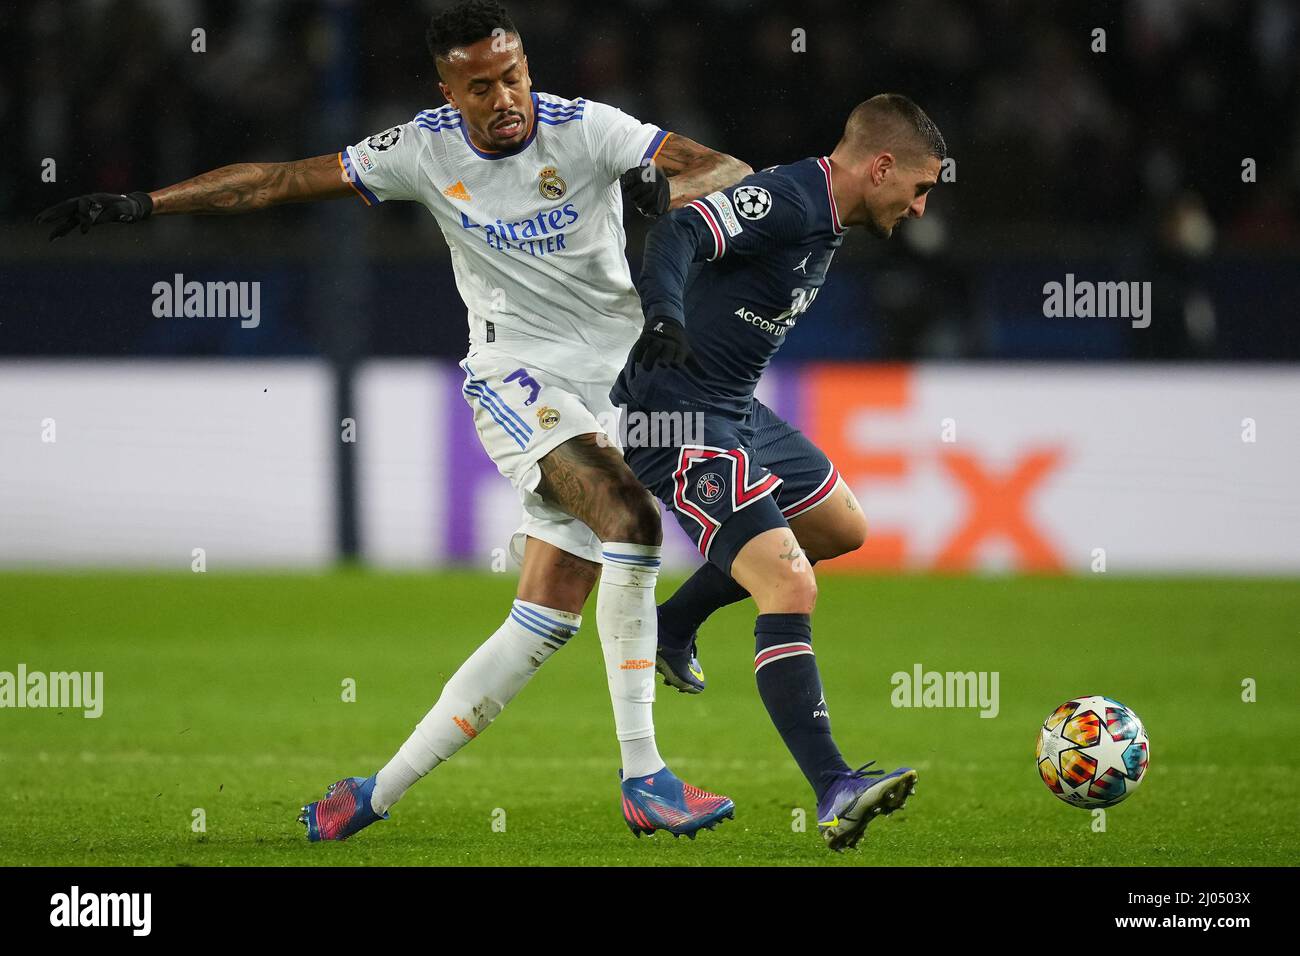 Eder Gabriel Militao of Real Madrid and Marco Verratti of PSG during the UEFA Champions League match between Paris Saint Germain and Real Madrid played at Parque des Princes Stadium on February 15, 2022 in Paris, Spain. (Photo by PRESSINPHOTO) Stock Photo